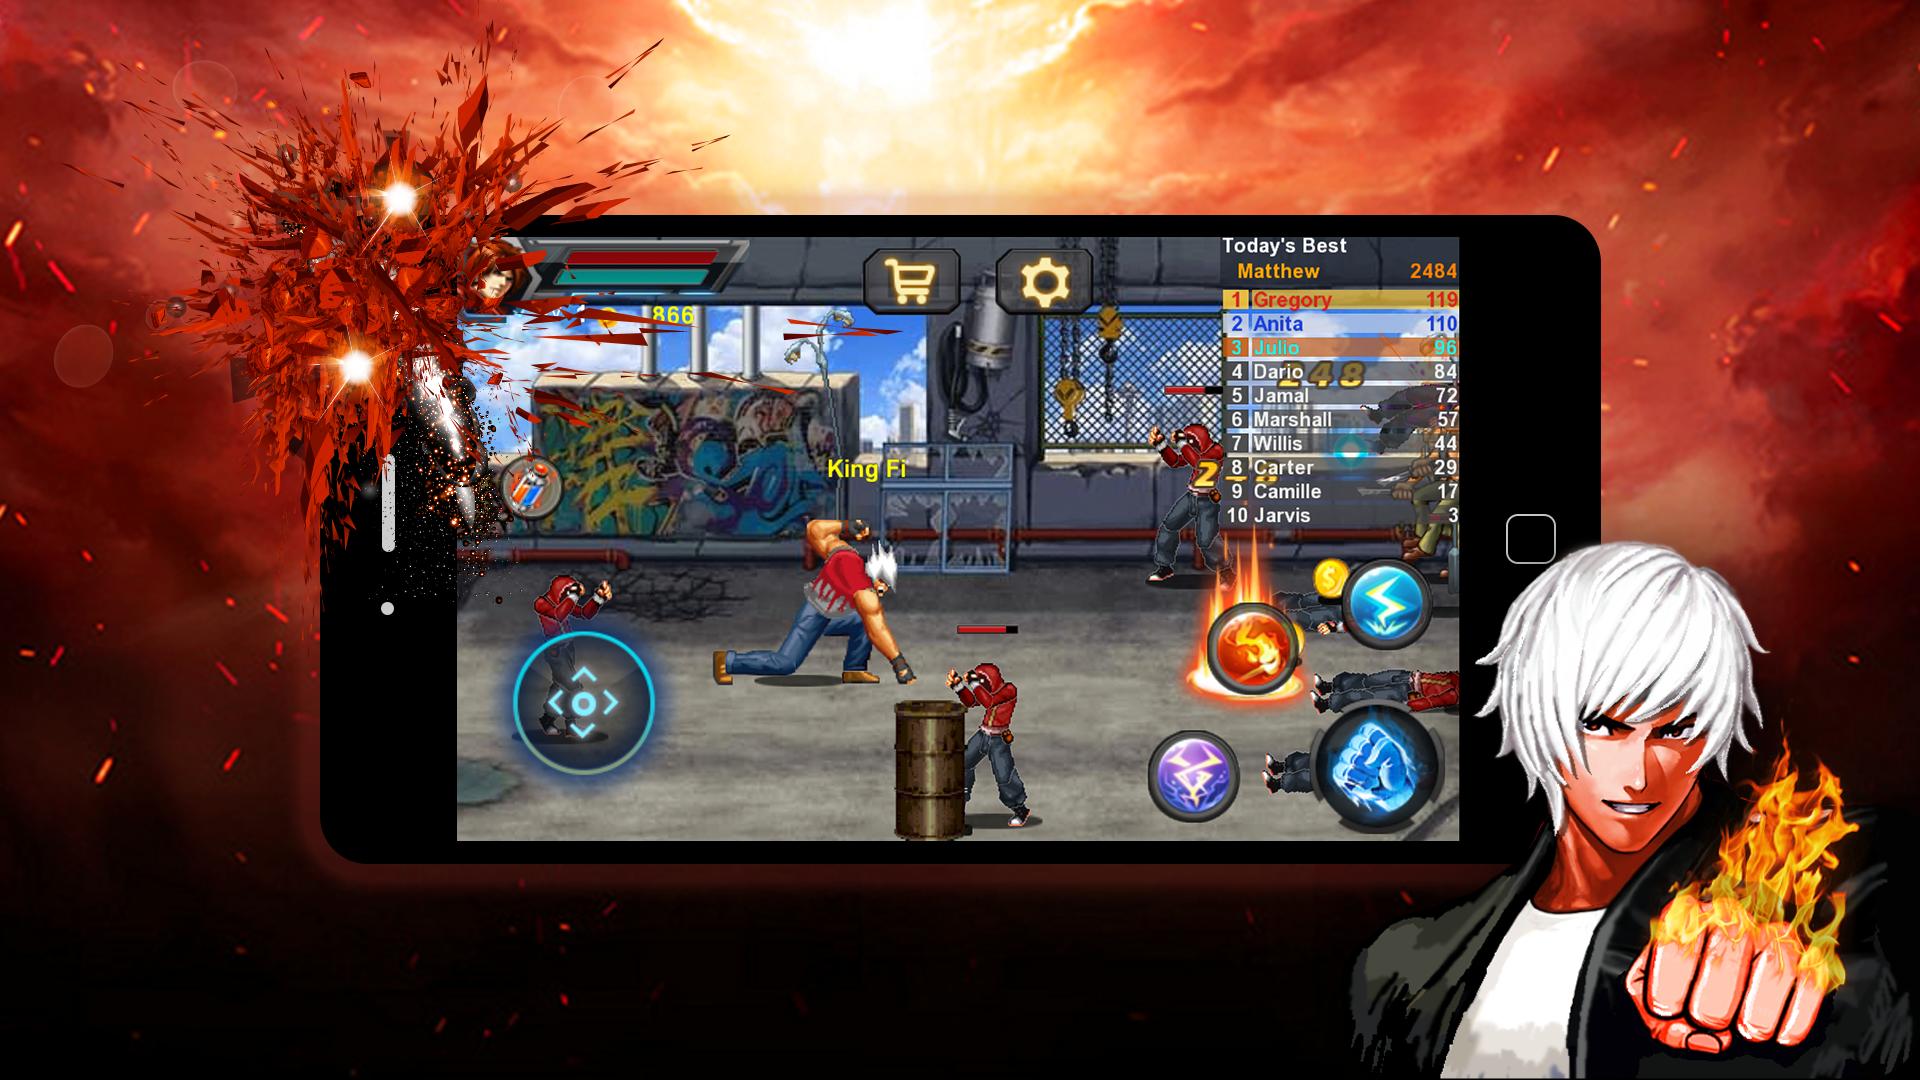 Fighter King APK - Free download for Android